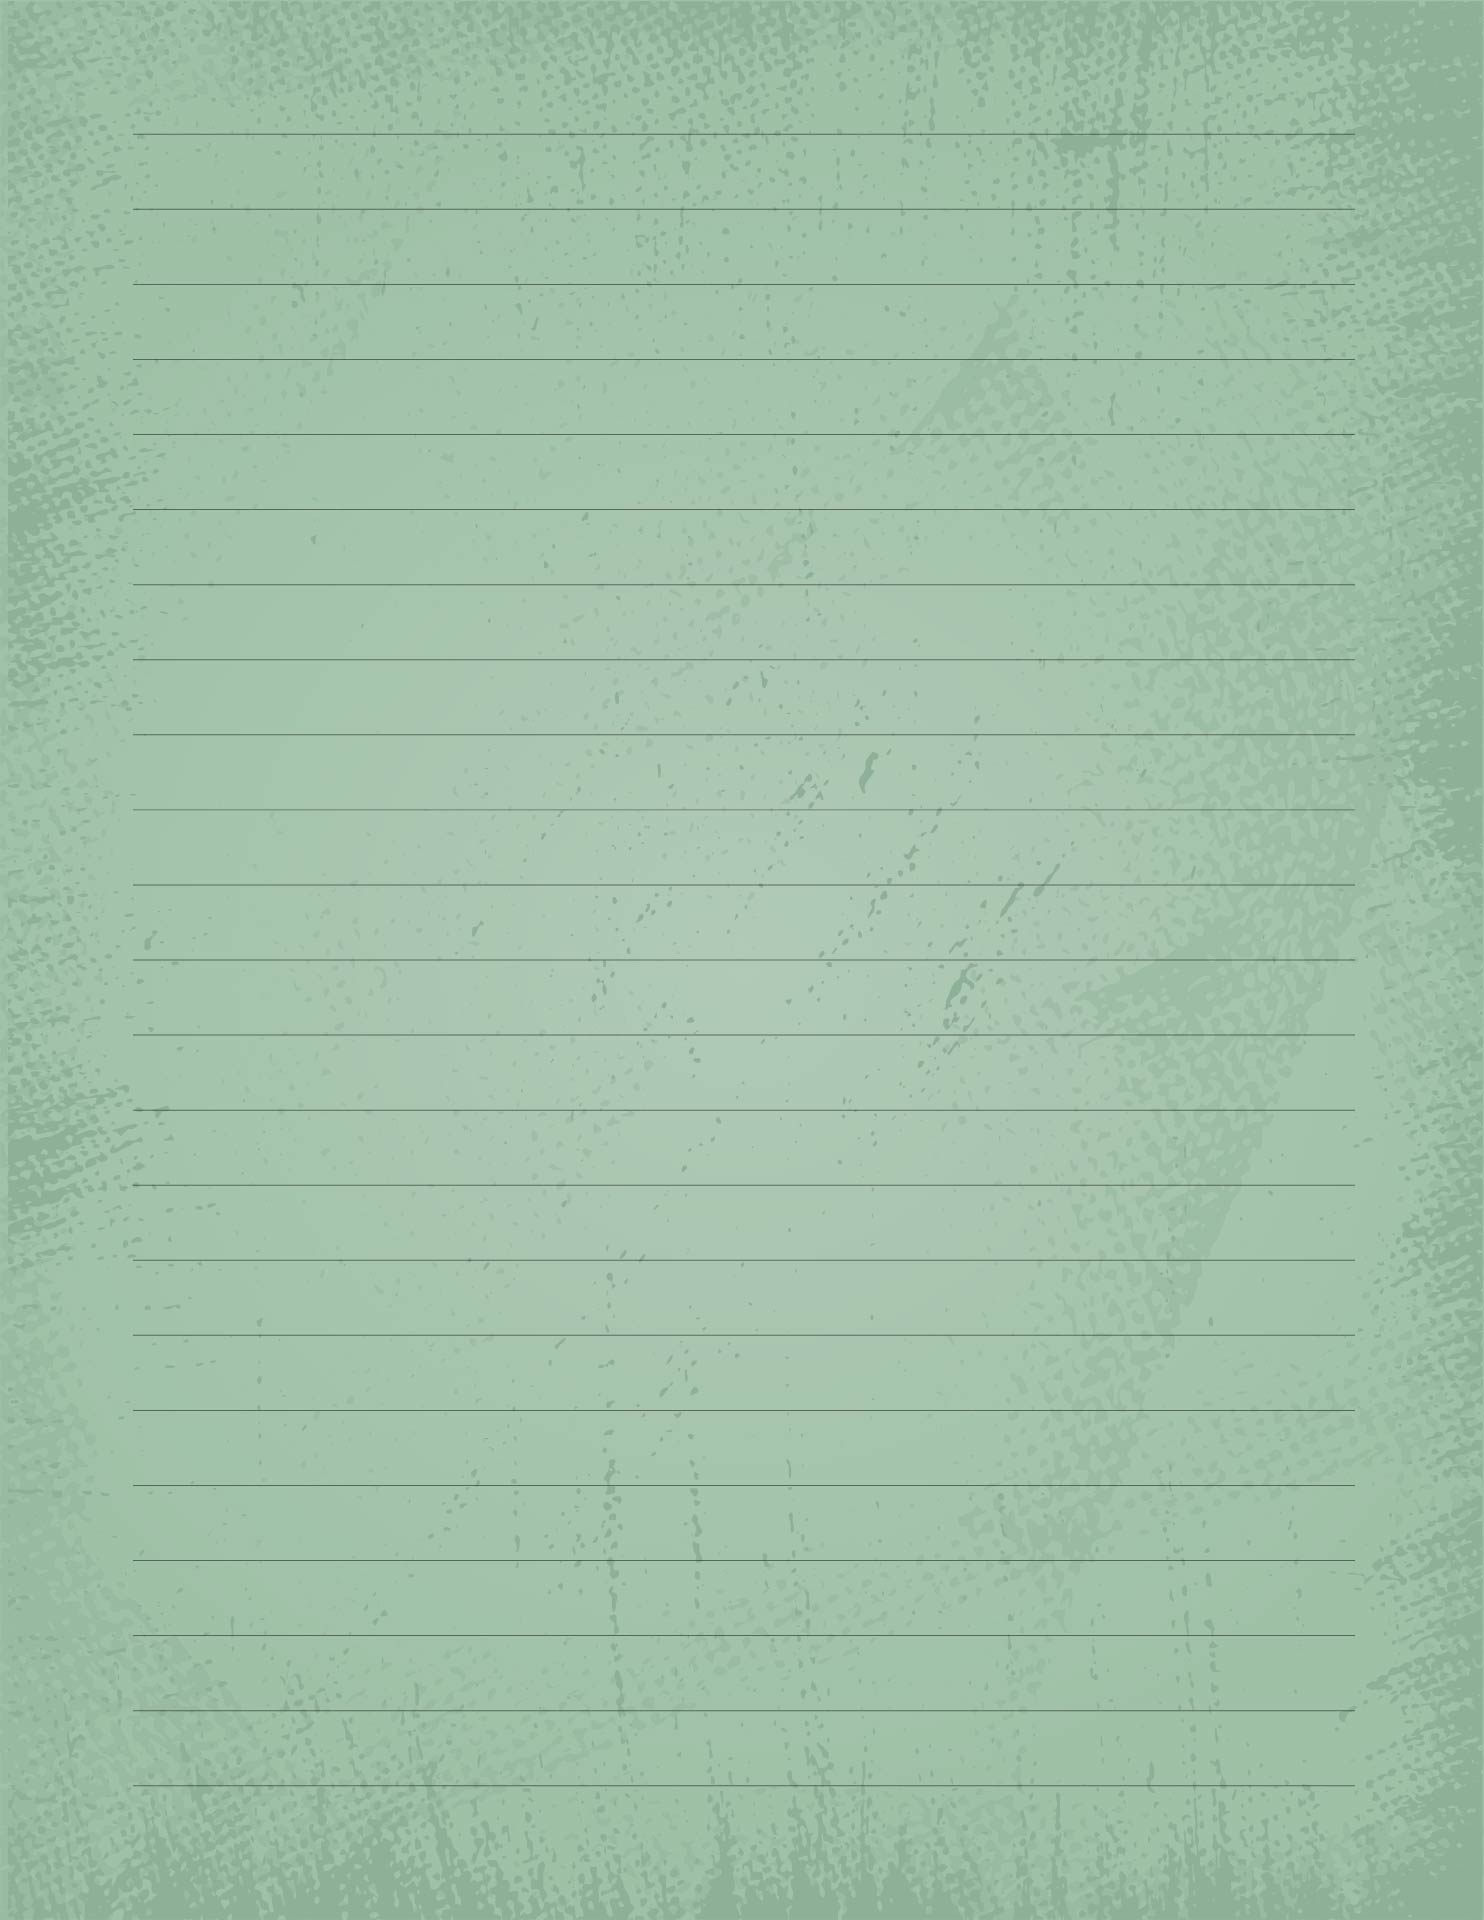 Printable Lined Journal Paper